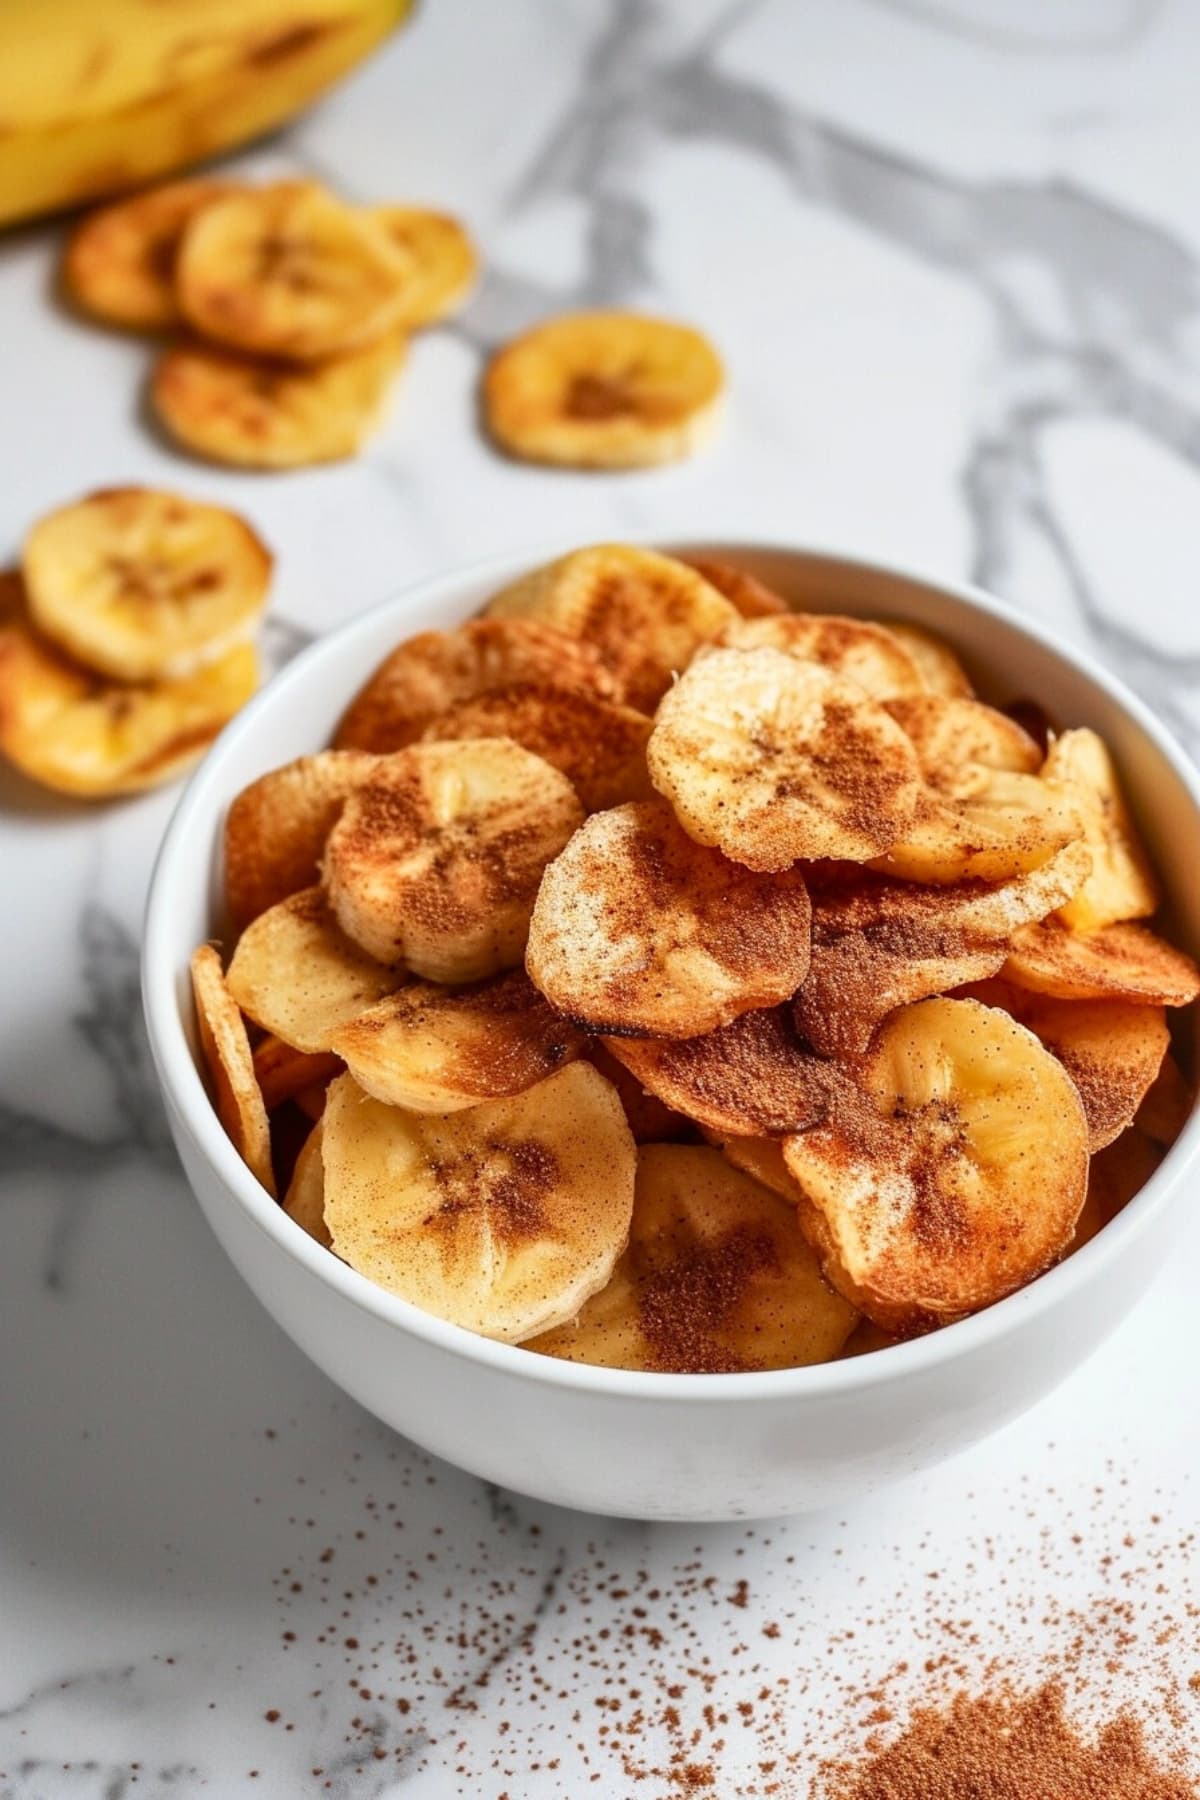 Bowl of banana chips dusted with cinnamon powder in a white bowl.